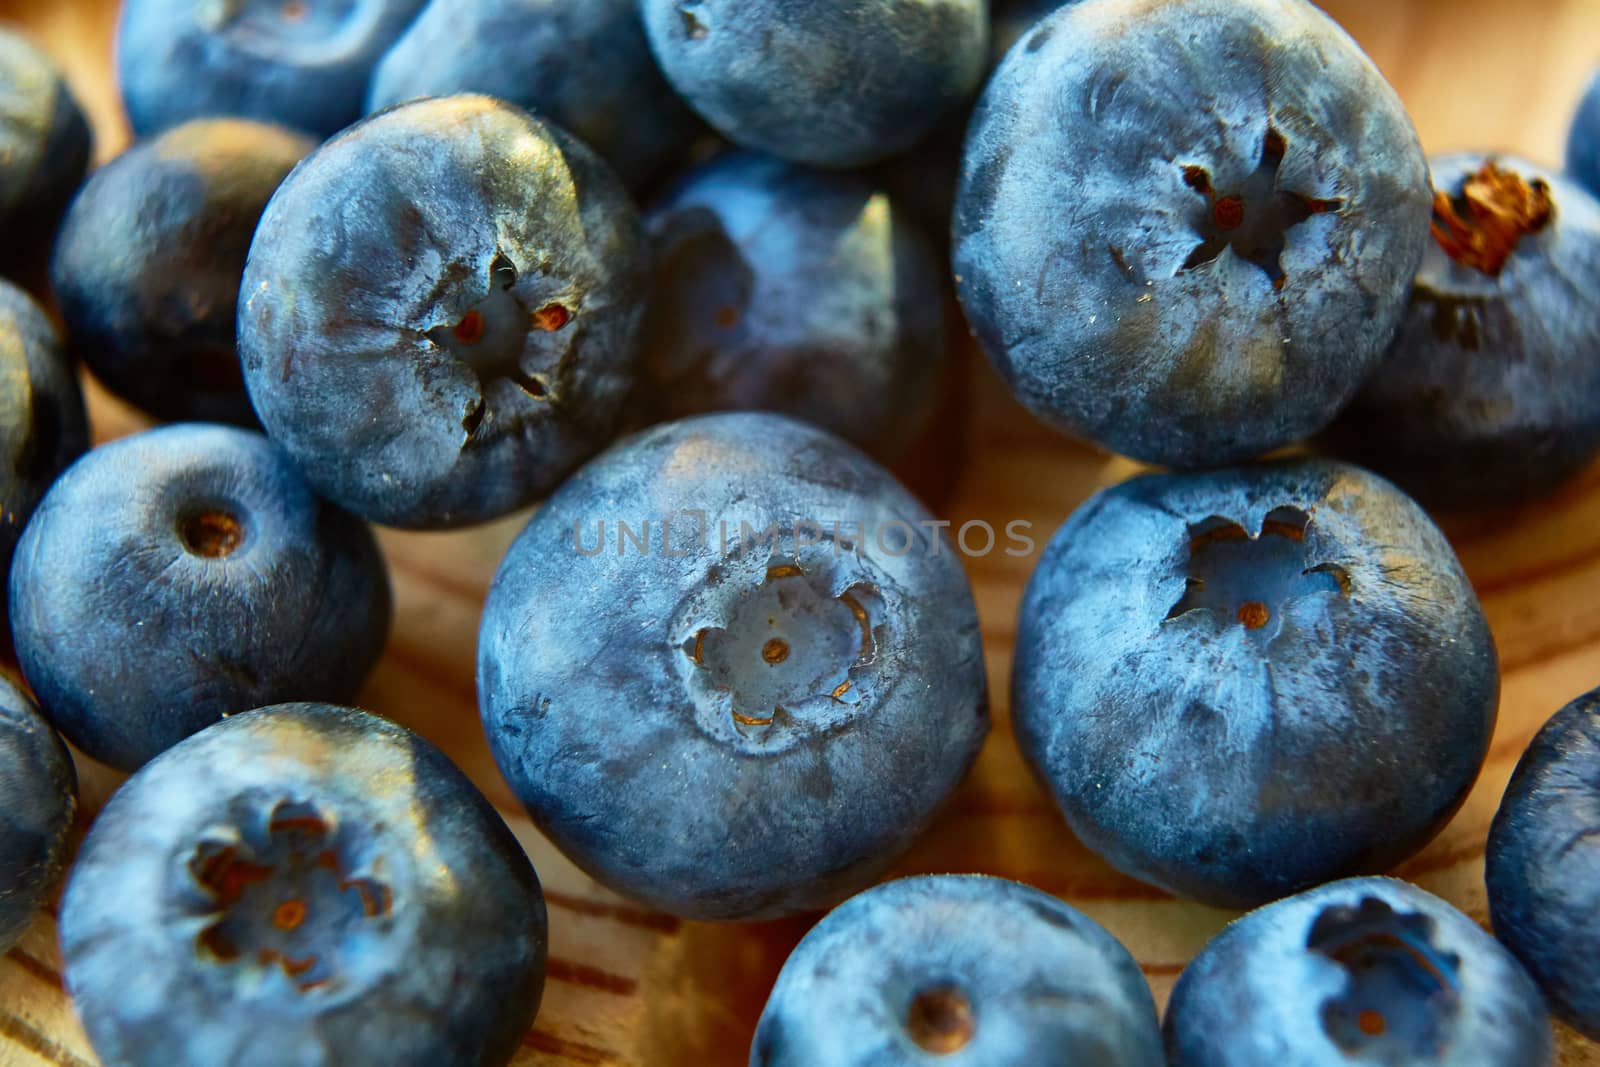 Freshly picked blueberries on wooden background. Shallow dof